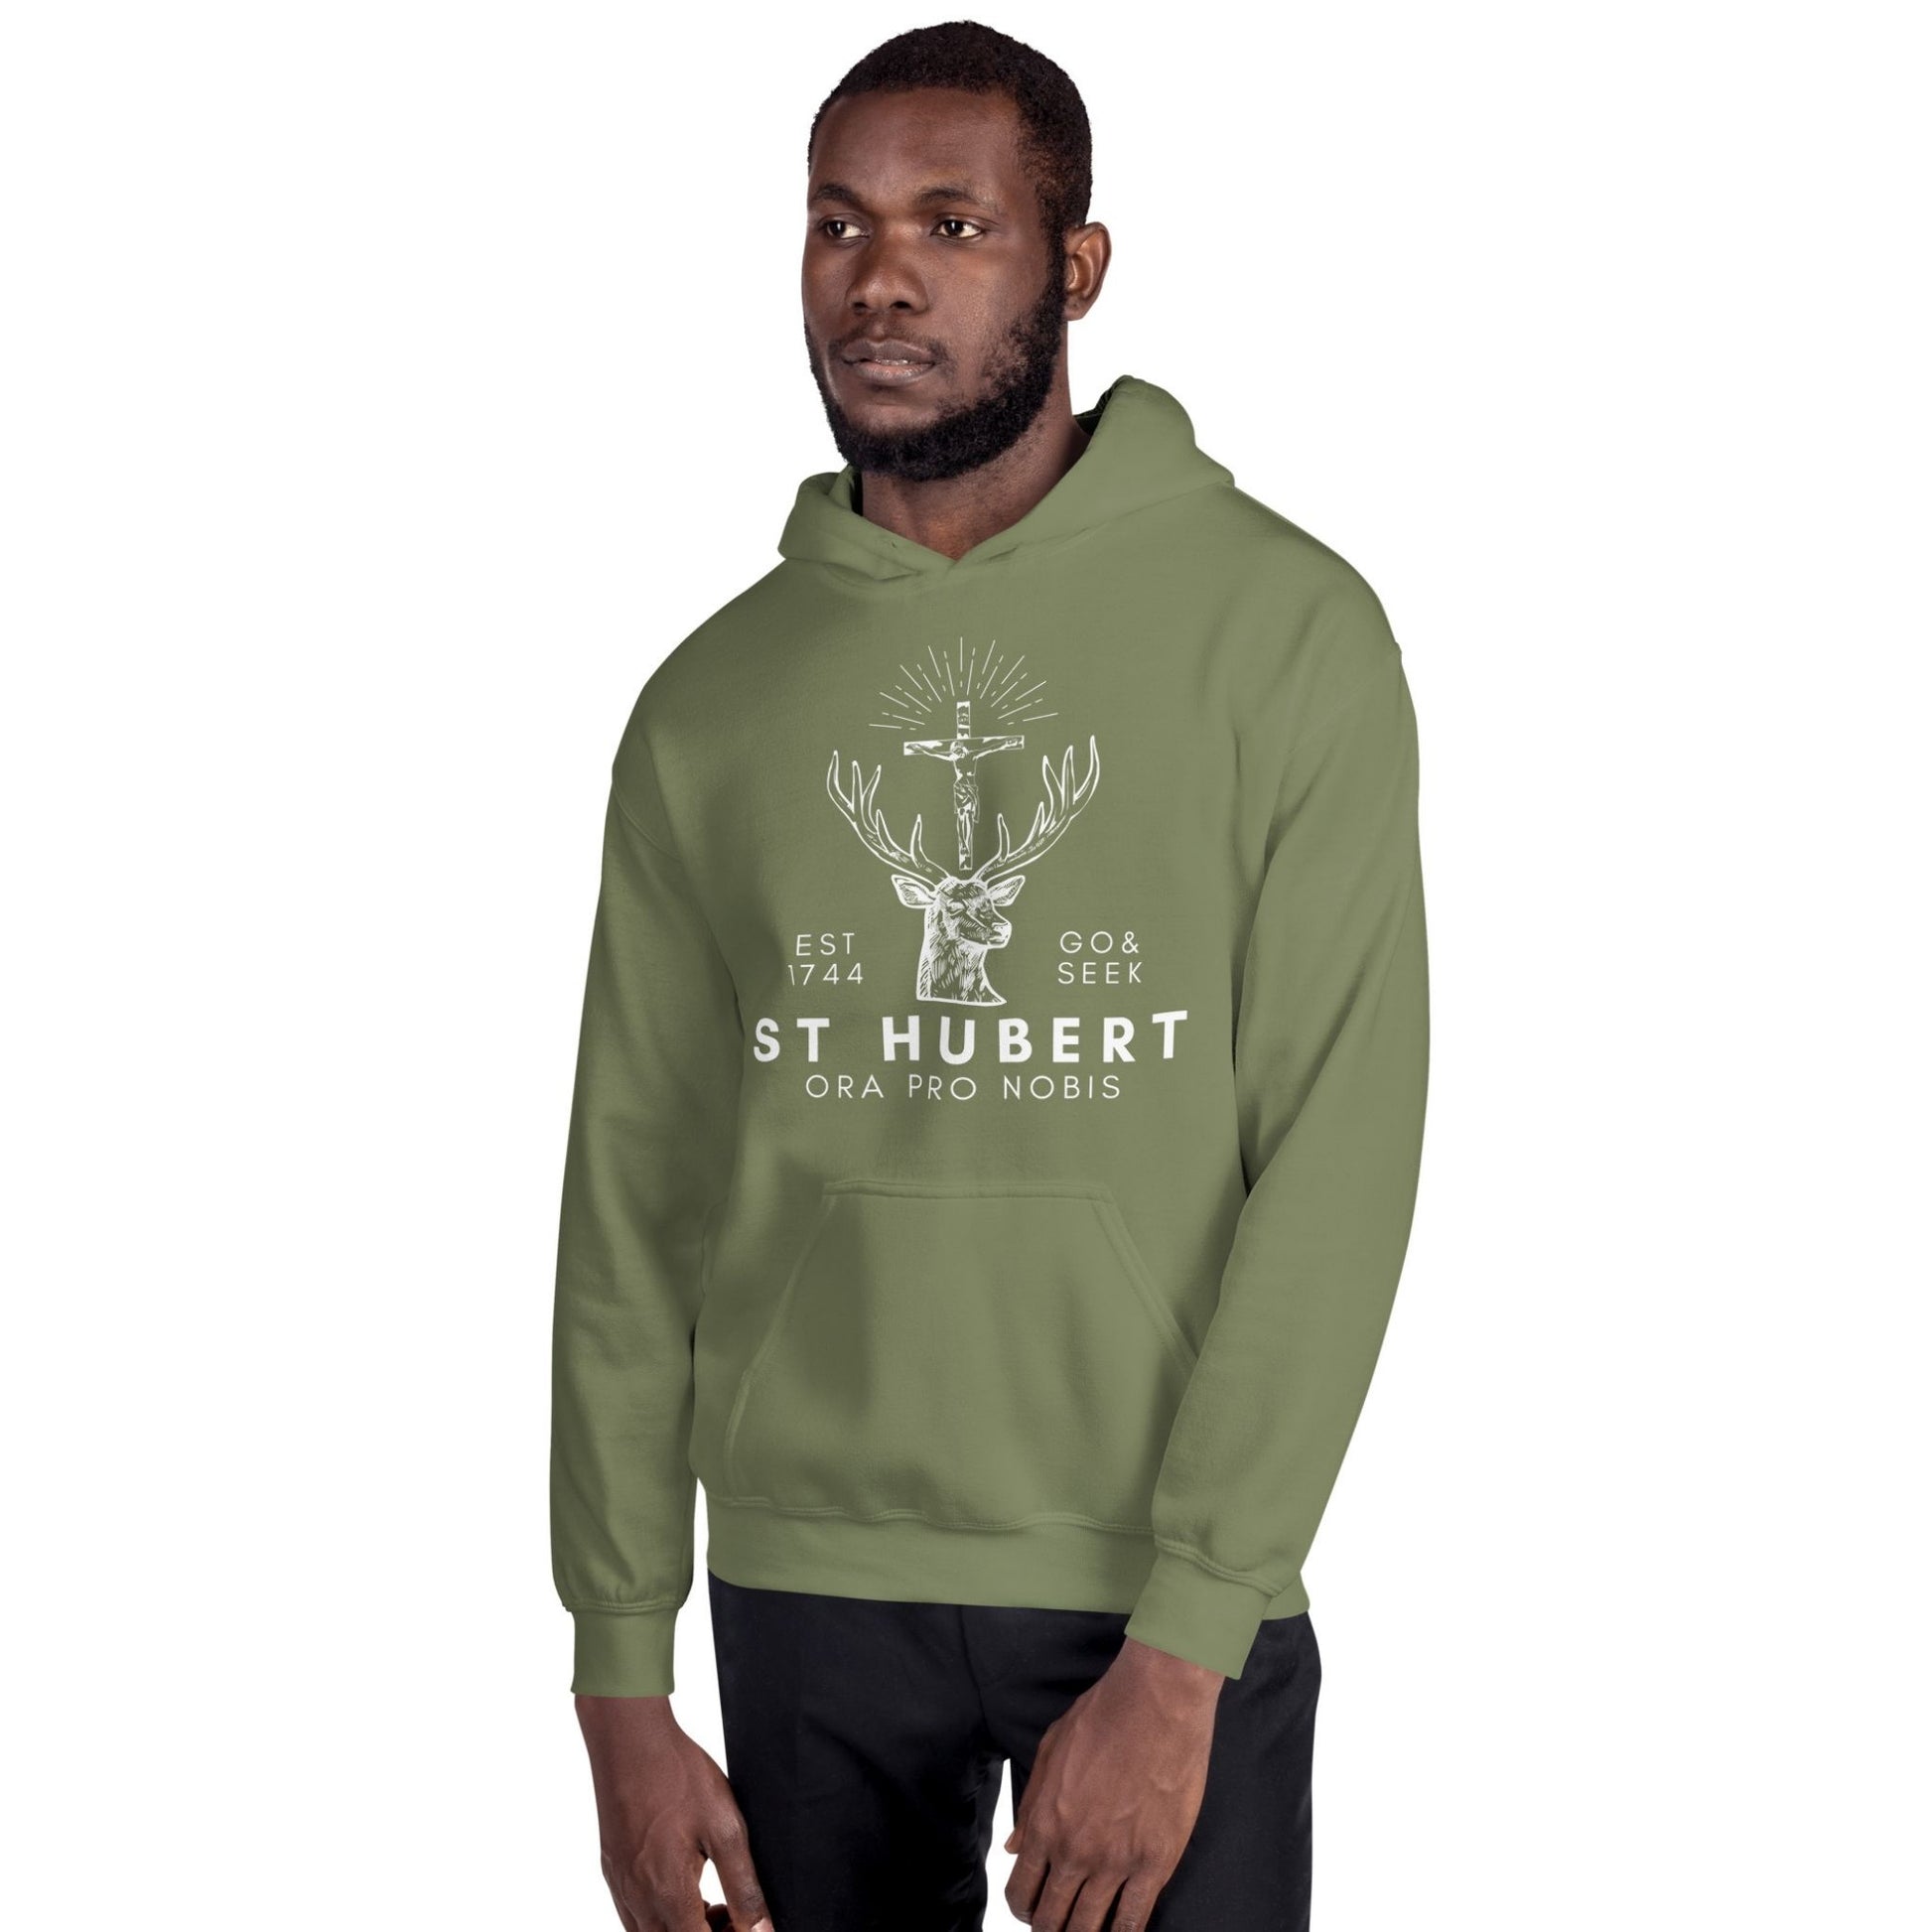 a man wearing a green hoodie that says st hubbert